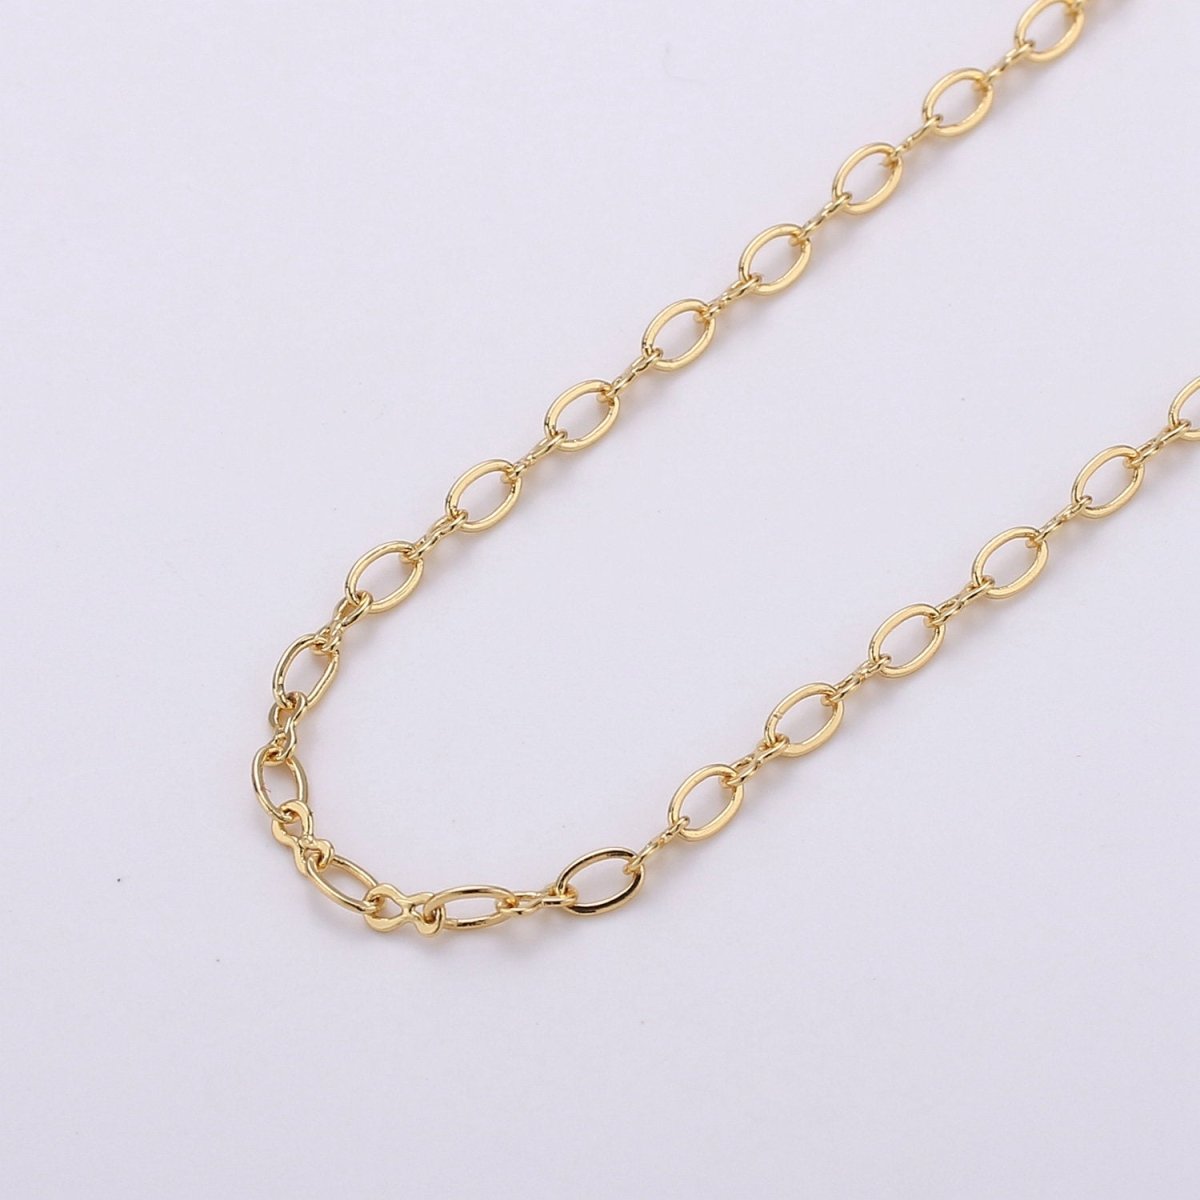 Dainty 24K Gold Filled Rolo Chain, 3x4mm, Sold by the Yard Unfinished Chain for Jewelry Making Supply, CABLE Chain | ROLL-150 Clearance Pricing - DLUXCA